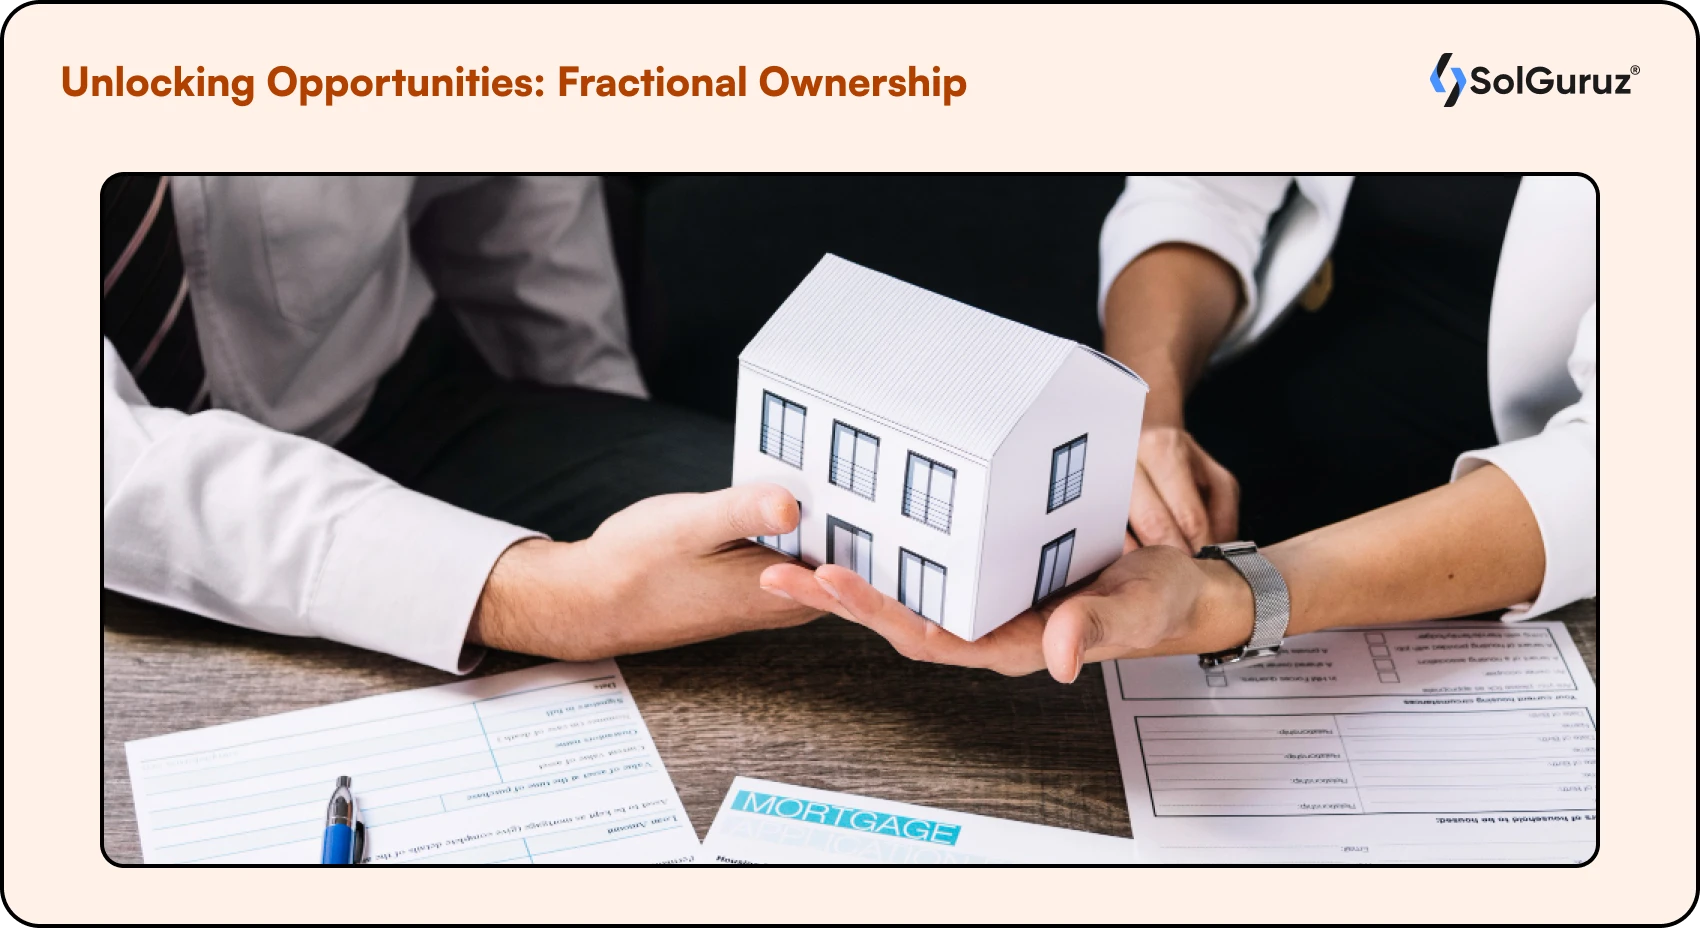 Unlocking Opportunities - Fractional Ownership